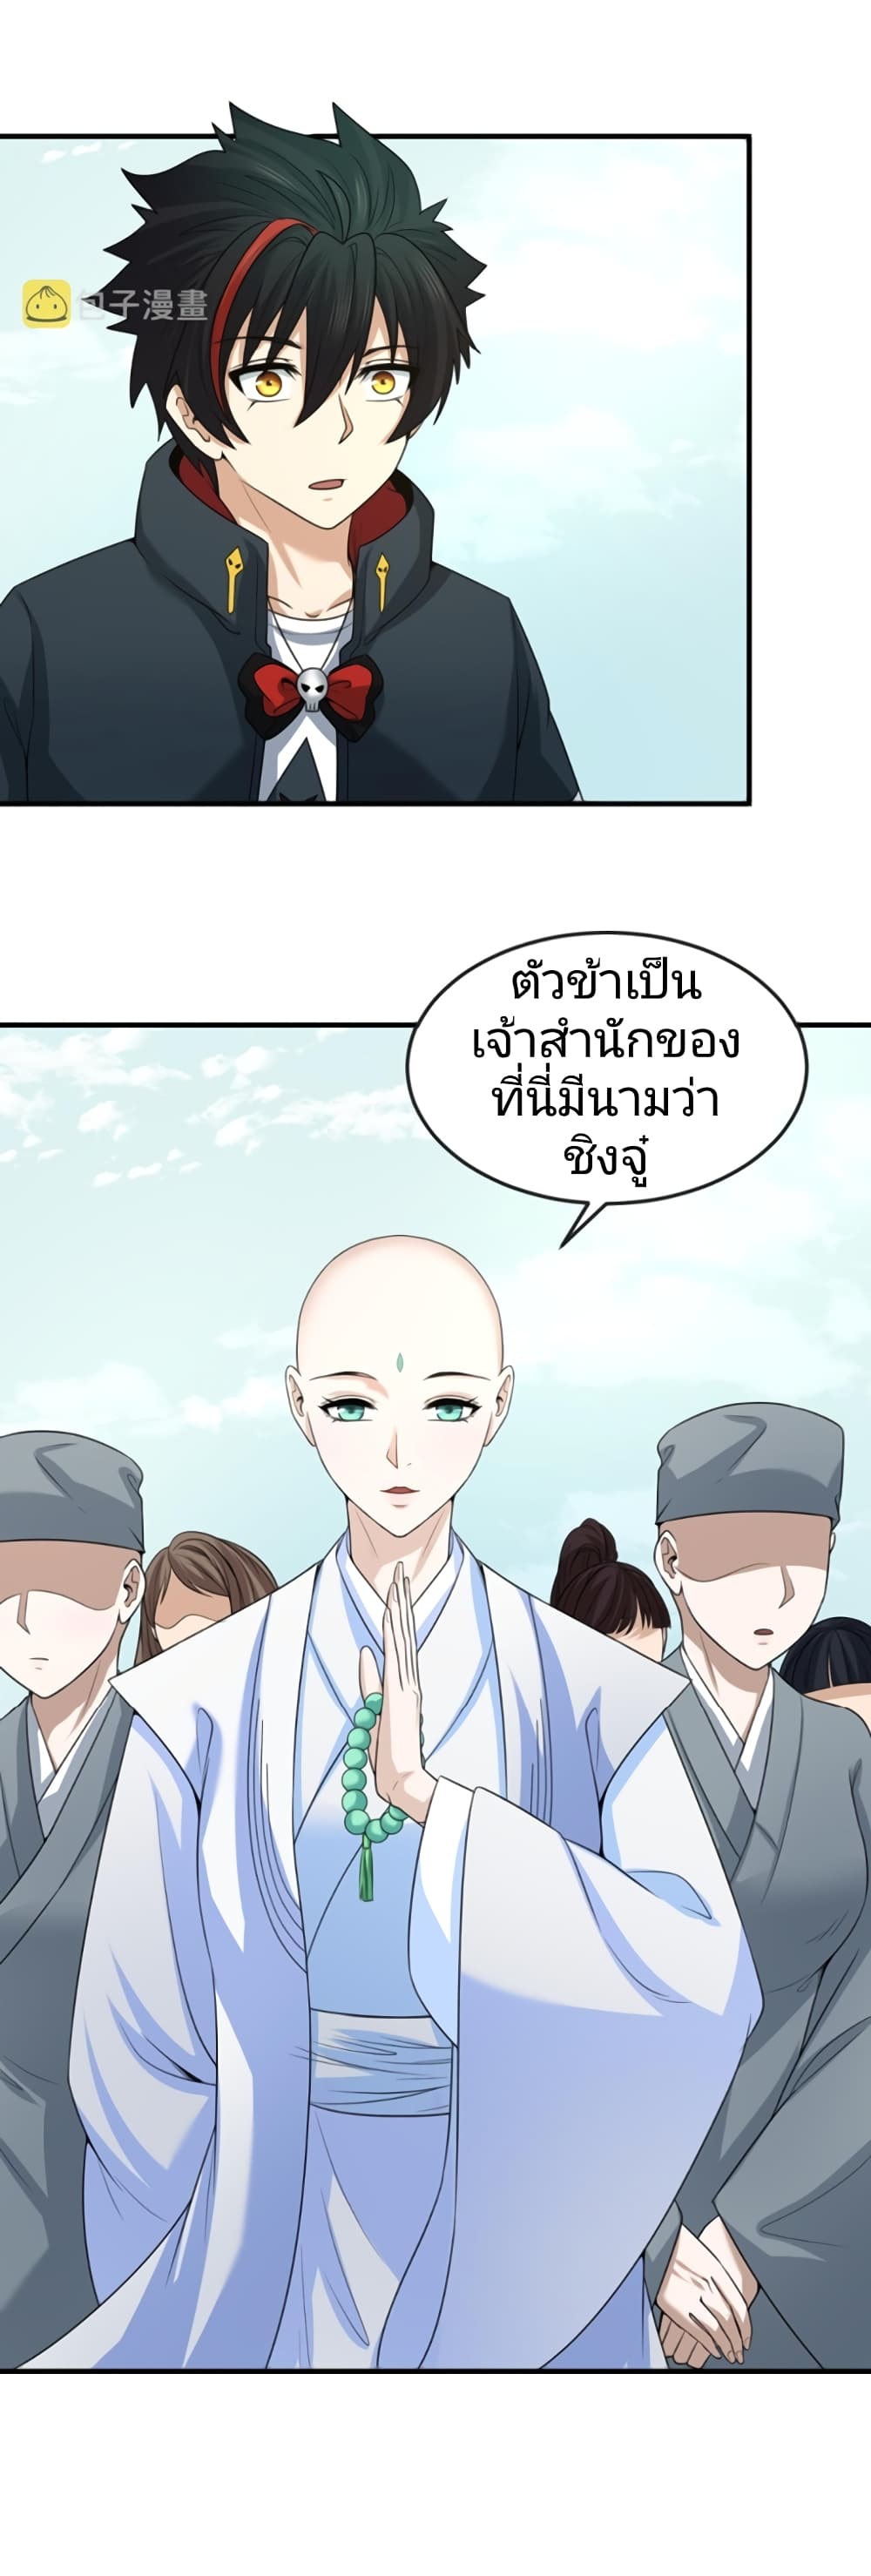 The Age of Ghost Spirits à¸à¸­à¸à¸à¸µà¹ 43 (33)